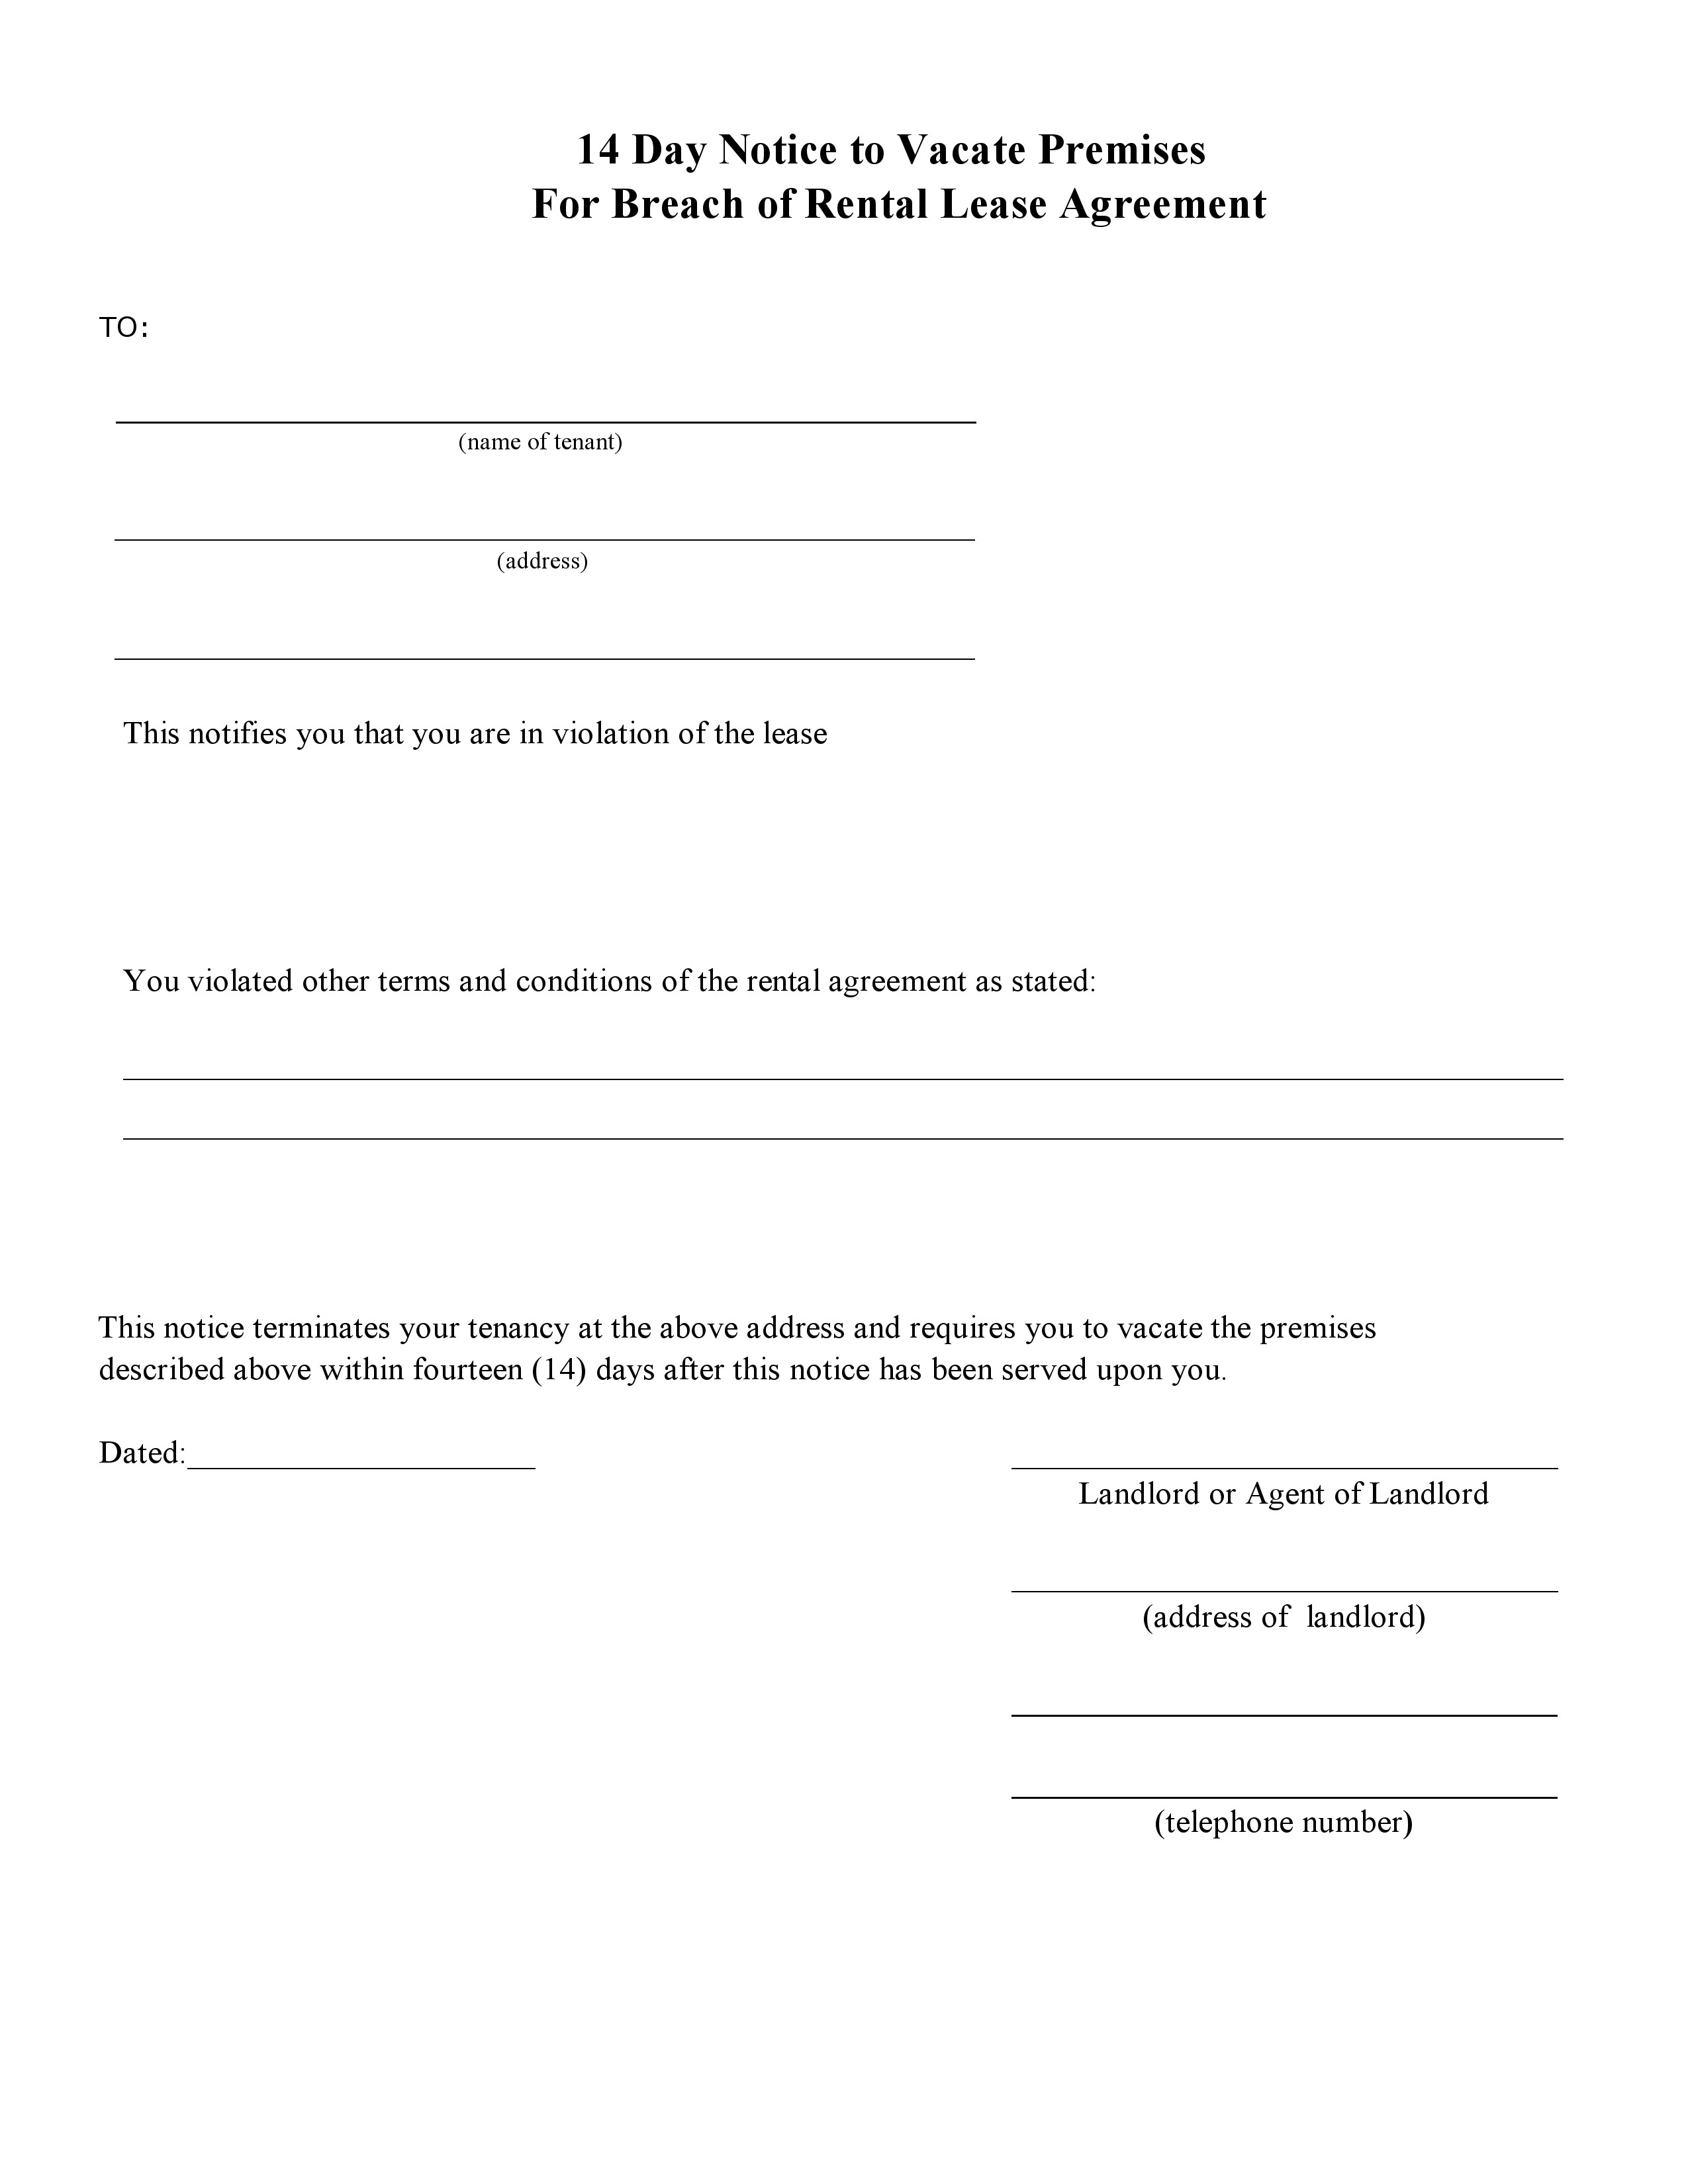 Free Blank 14 Day Eviction Notice Form For Breach Of Agreement Pdf 